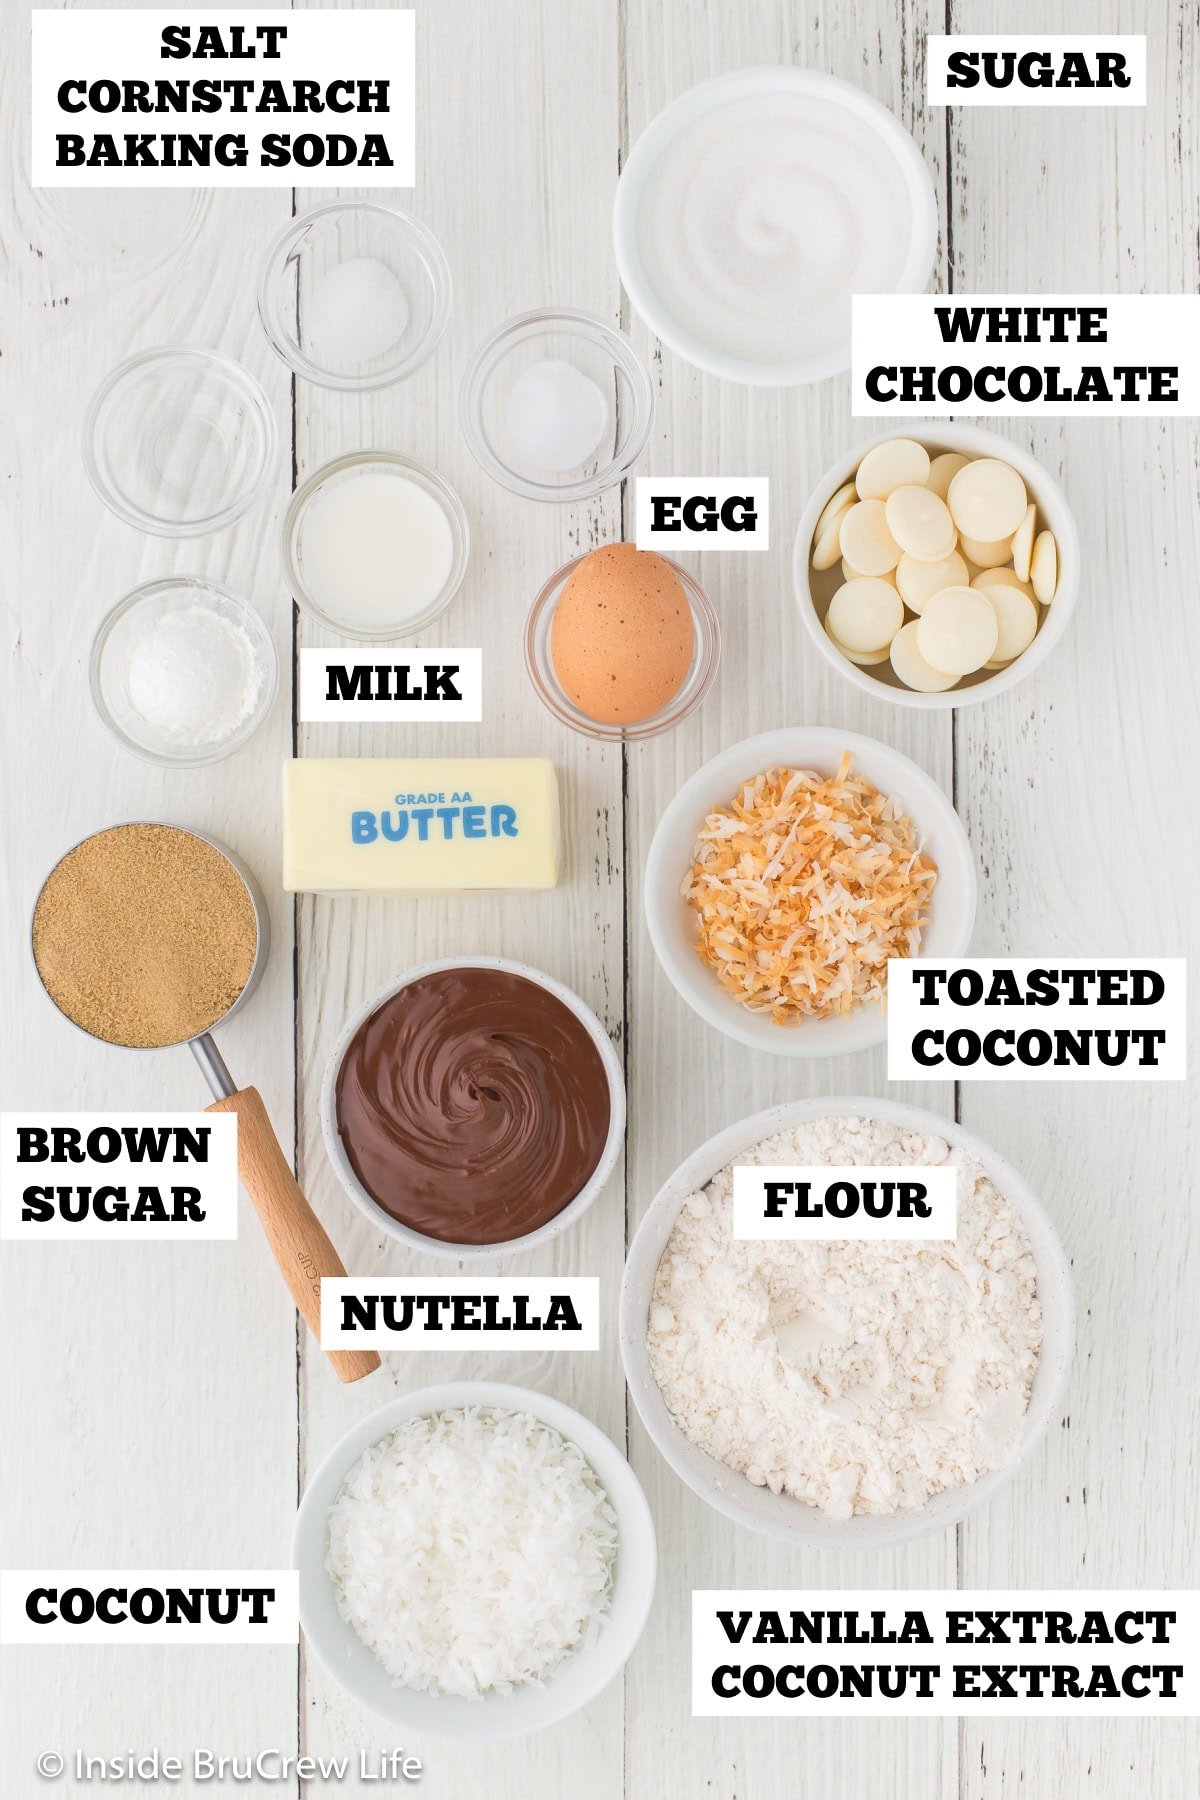 Bowls of ingredients needed to make cookies filled with Nutella.